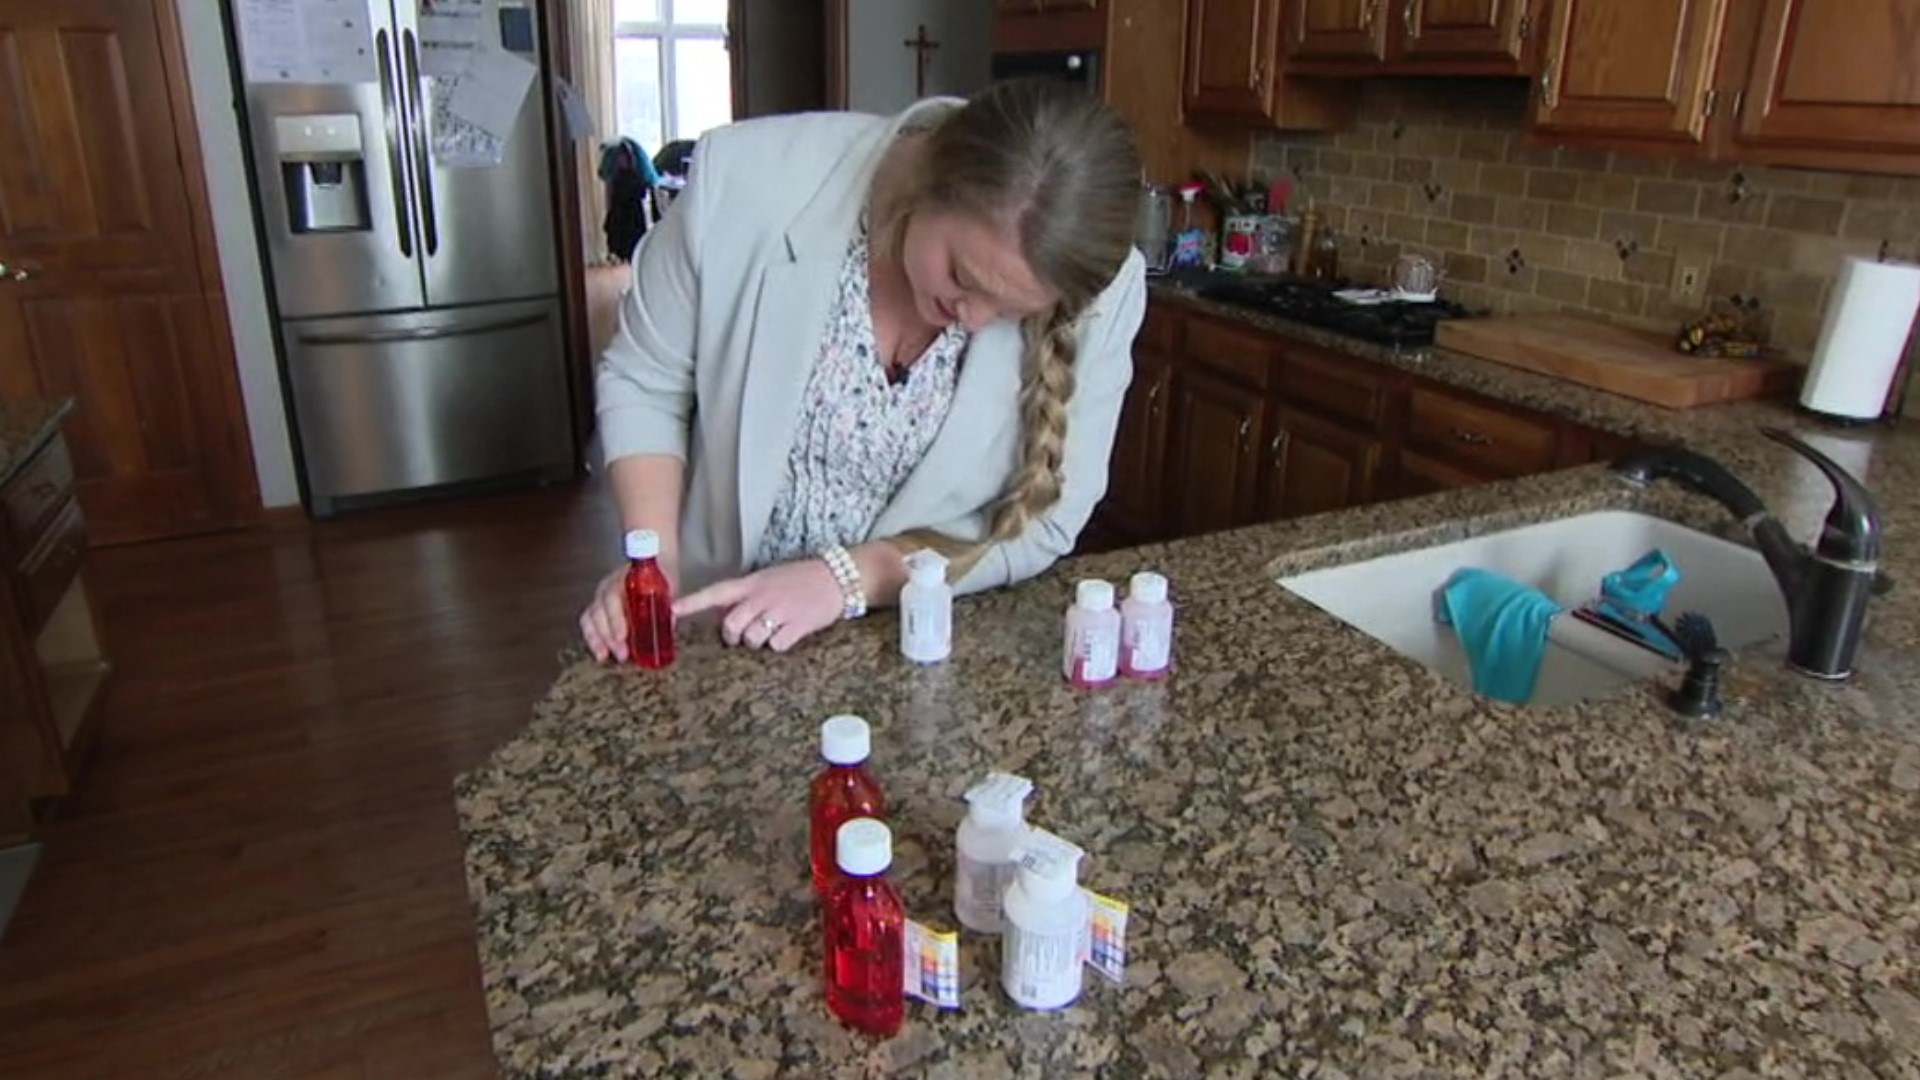 13 Investigates found there's no national or state tracking of medication errors.